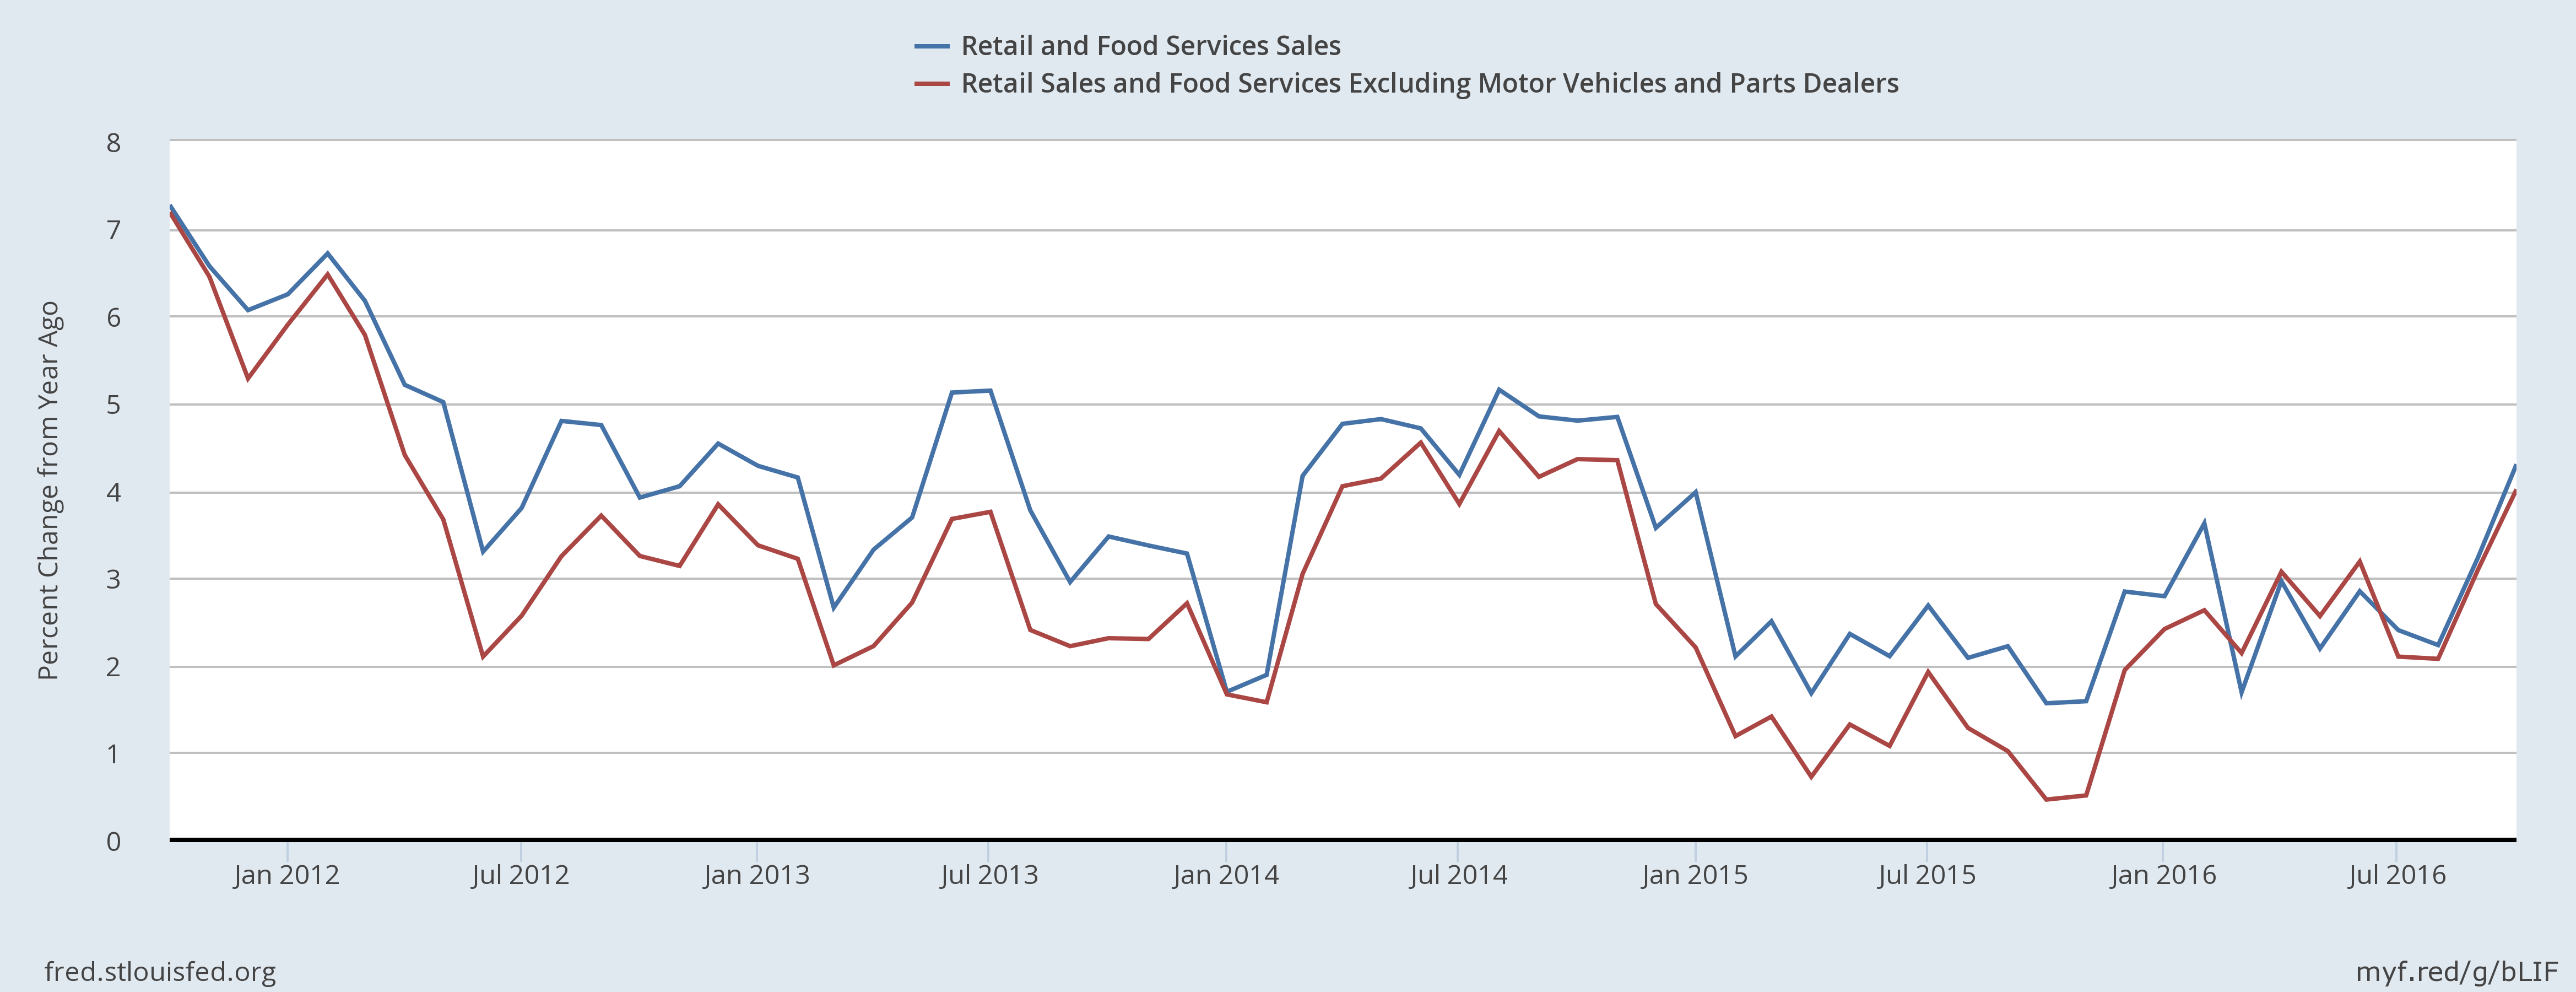 Retail And Food Services Sales 2